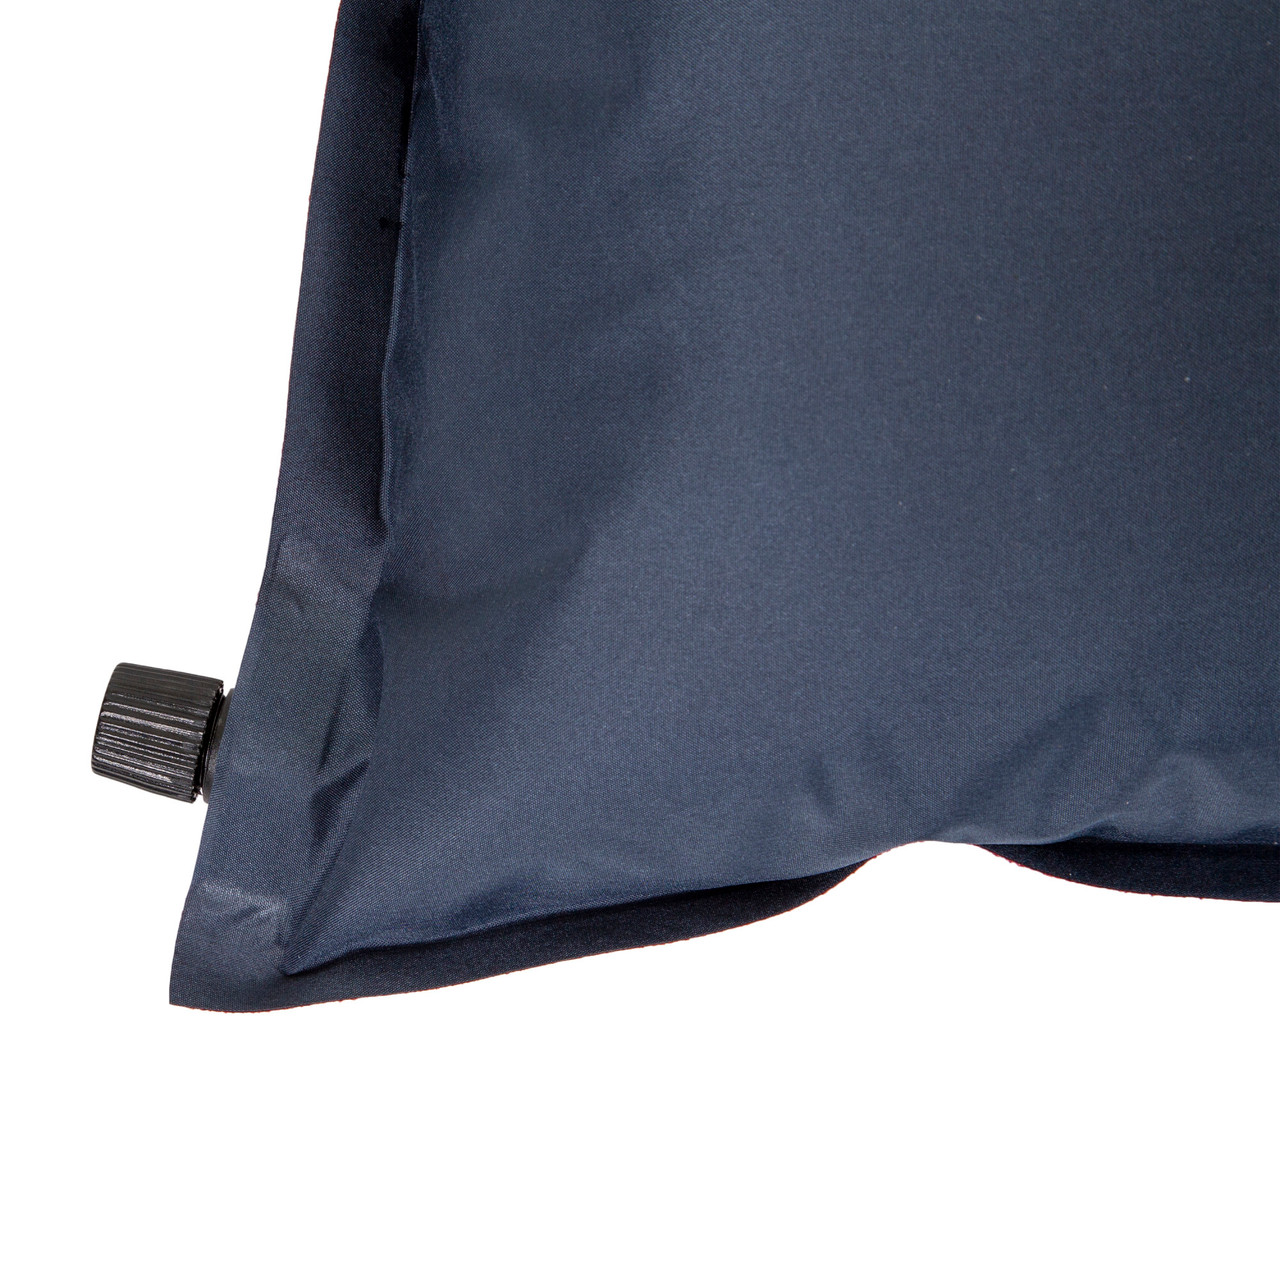 Self Inflating Seat Cushion From Travelon® Style #12511 